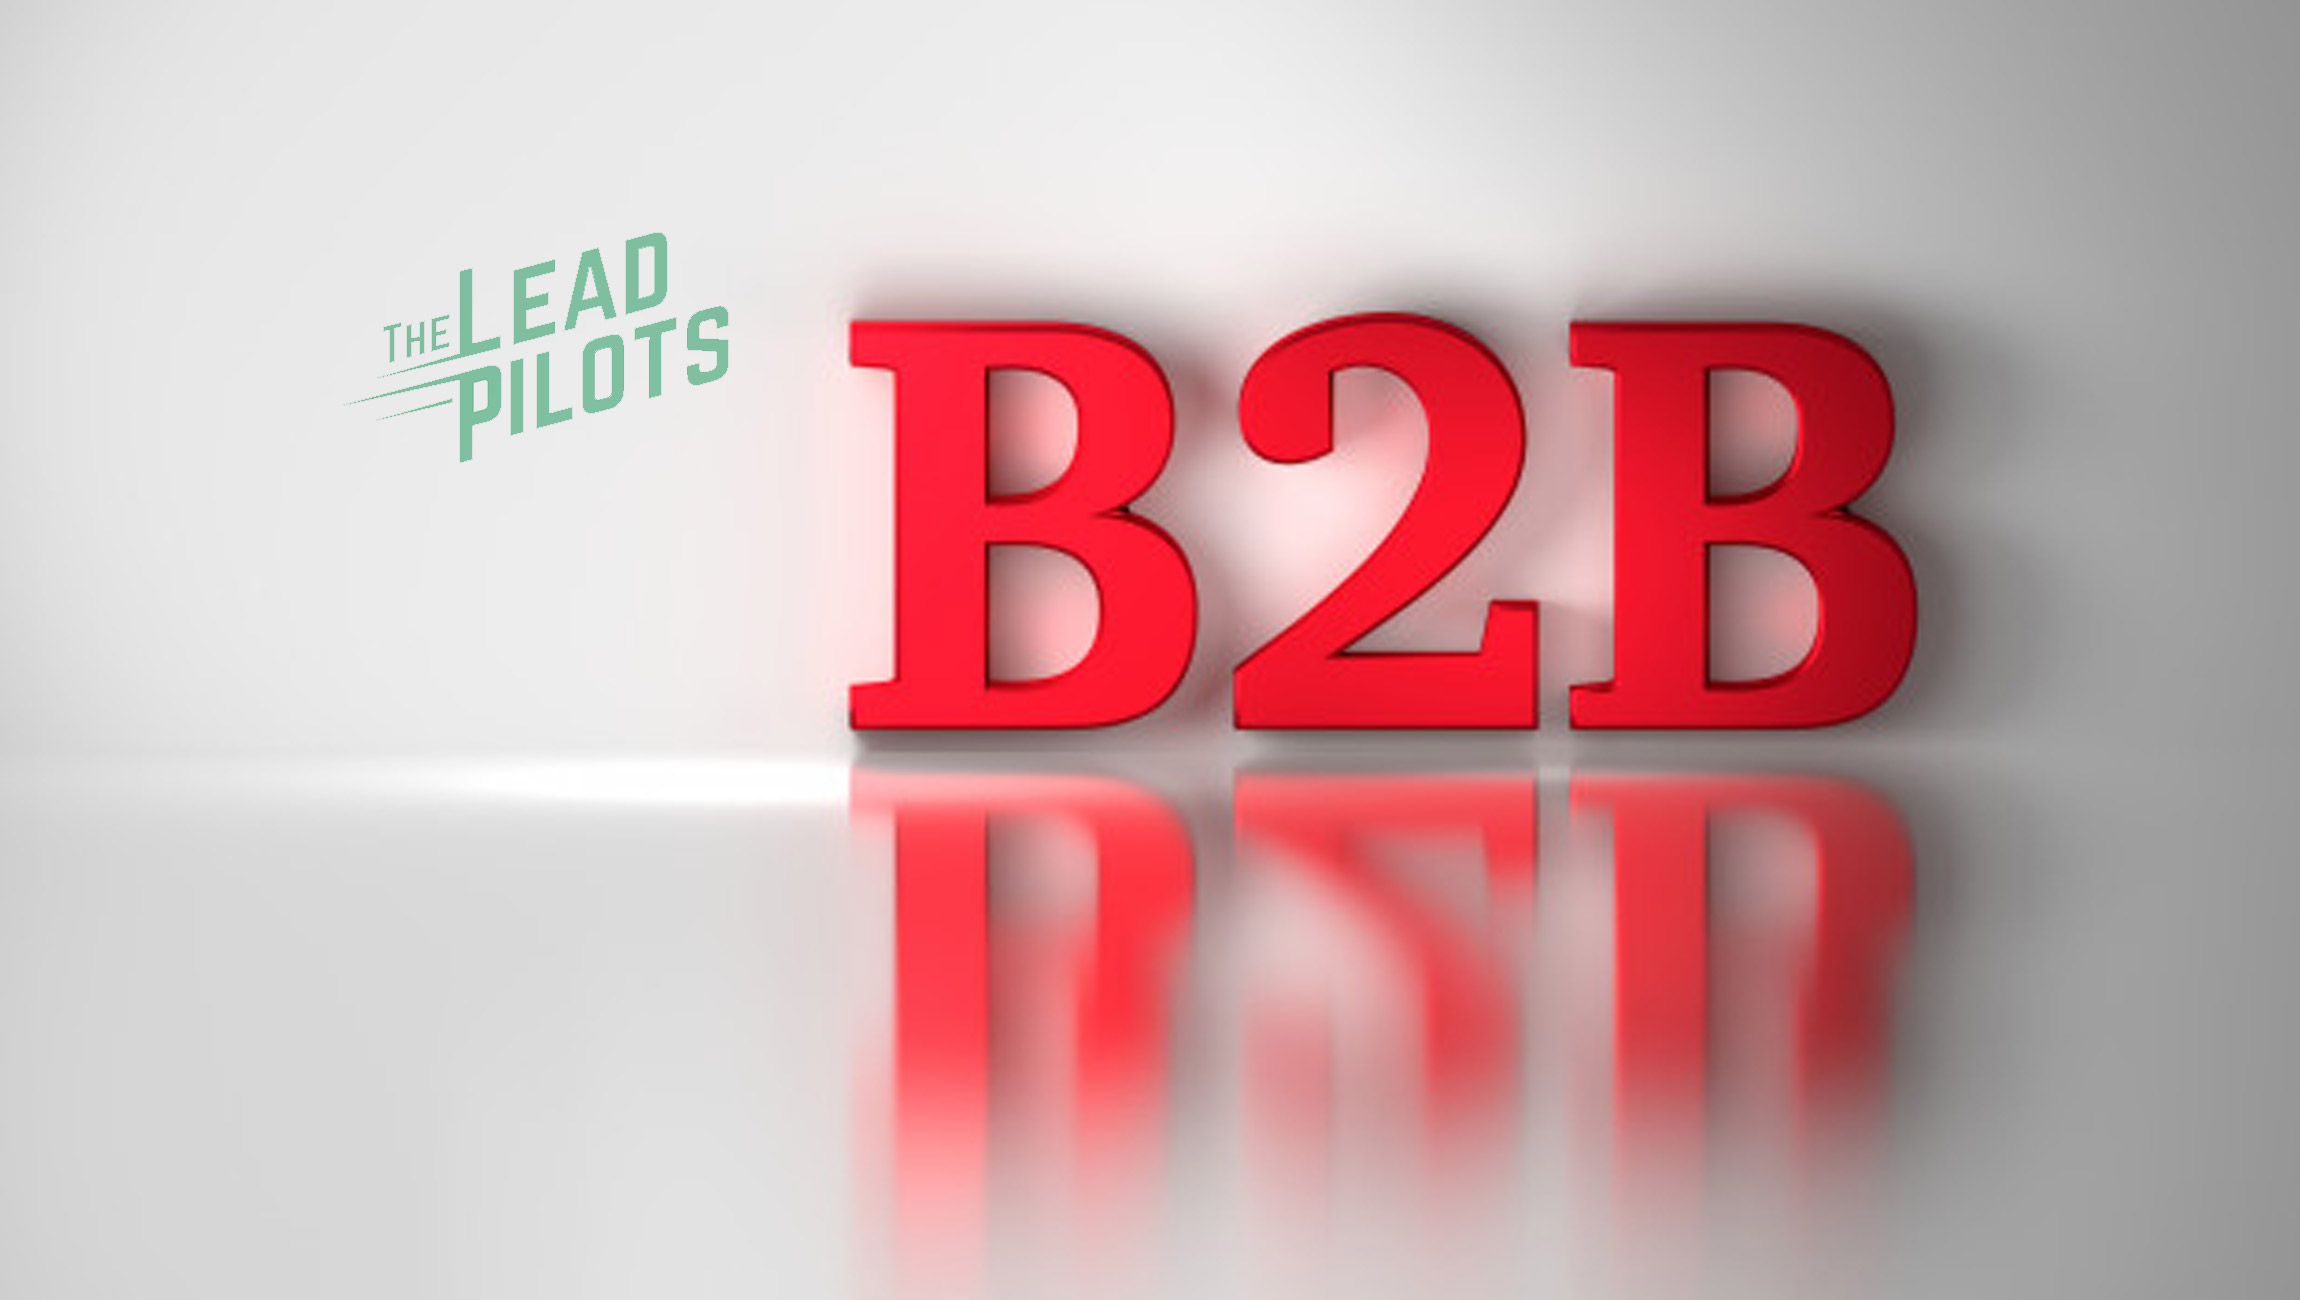 The Lead Pilots Solves Lead Generation Problem for B2B Companies